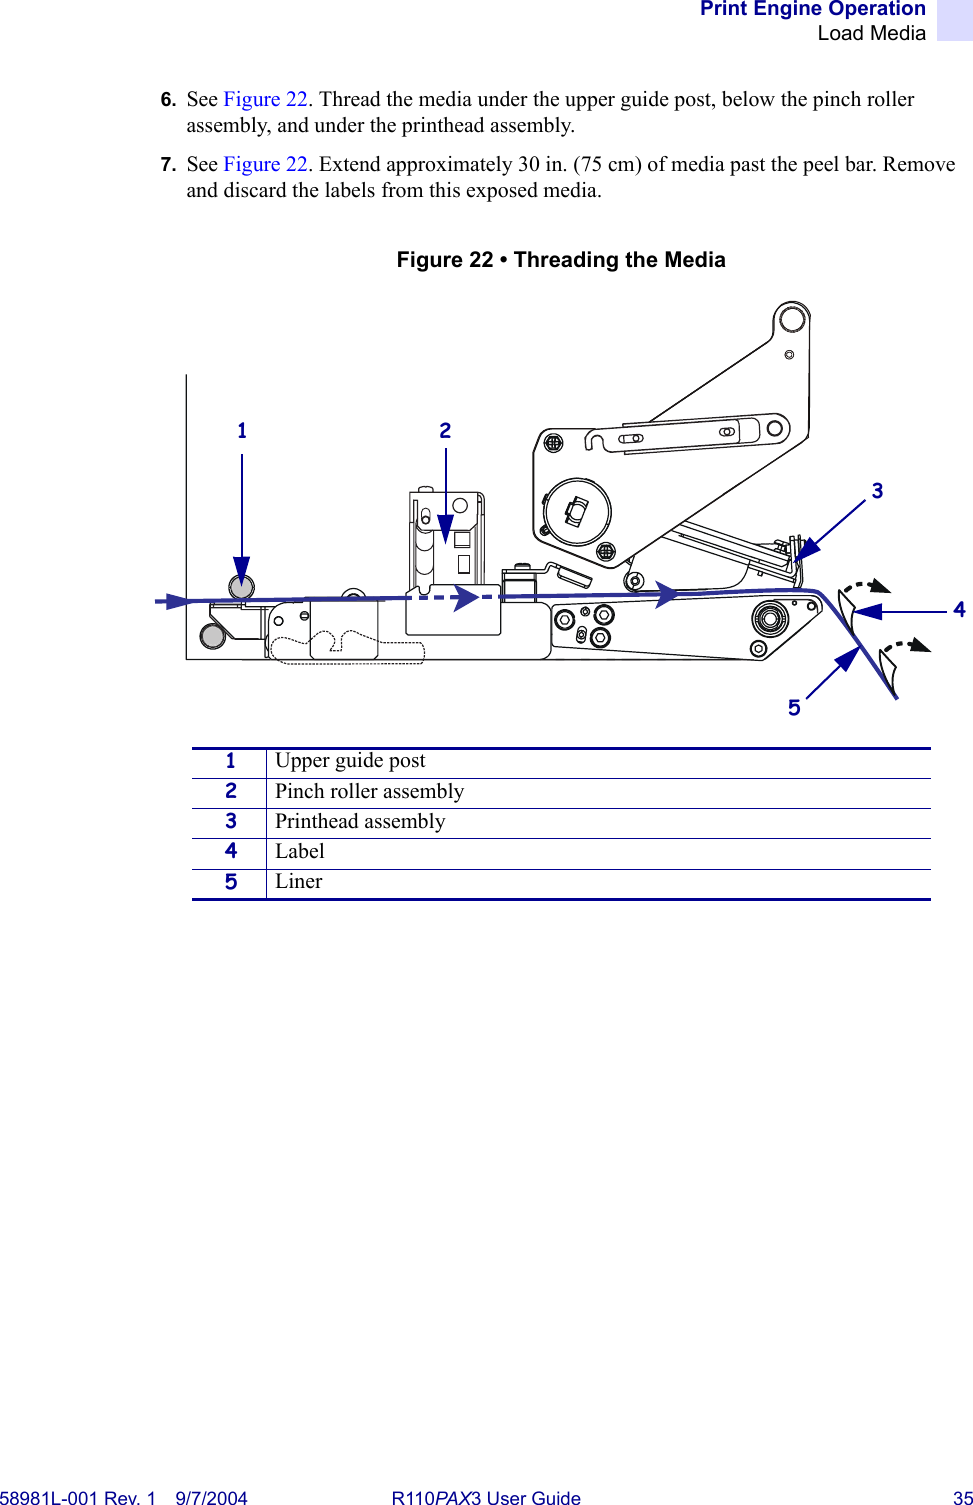 Print Engine OperationLoad Media58981L-001 Rev. 1 9/7/2004 R110PAX3 User Guide 356. See Figure 22. Thread the media under the upper guide post, below the pinch roller assembly, and under the printhead assembly. 7. See Figure 22. Extend approximately 30 in. (75 cm) of media past the peel bar. Remove and discard the labels from this exposed media.Figure 22 • Threading the Media1Upper guide post2Pinch roller assembly3Printhead assembly4Label5Liner1 2345